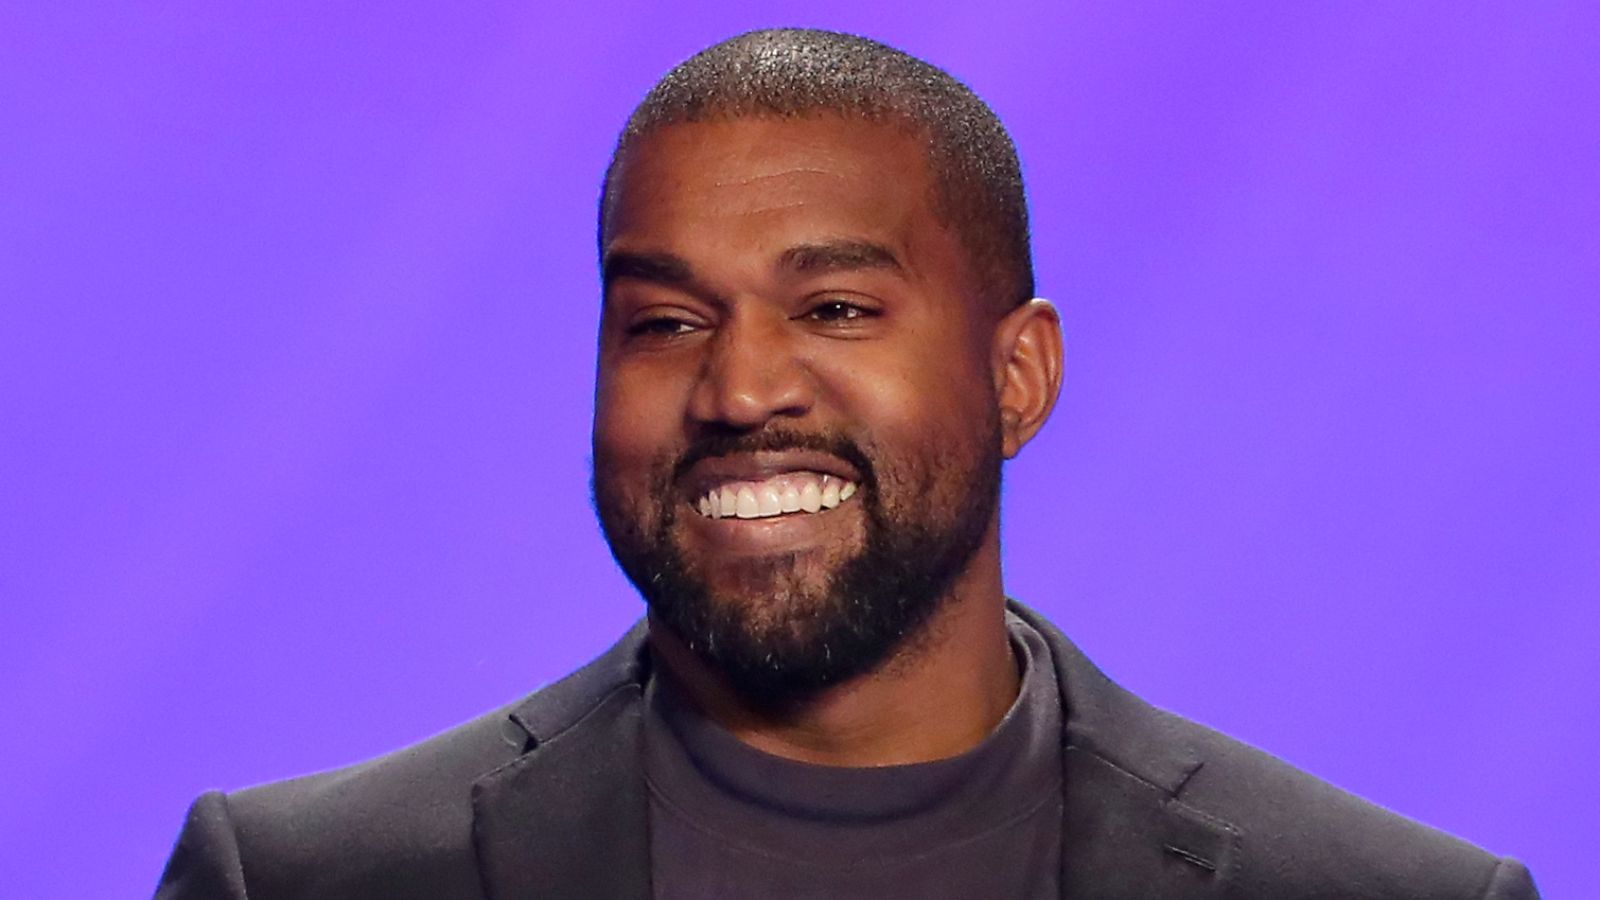 Kanye West's 'Campaign' Has Been More of a Disaster Than We Knew